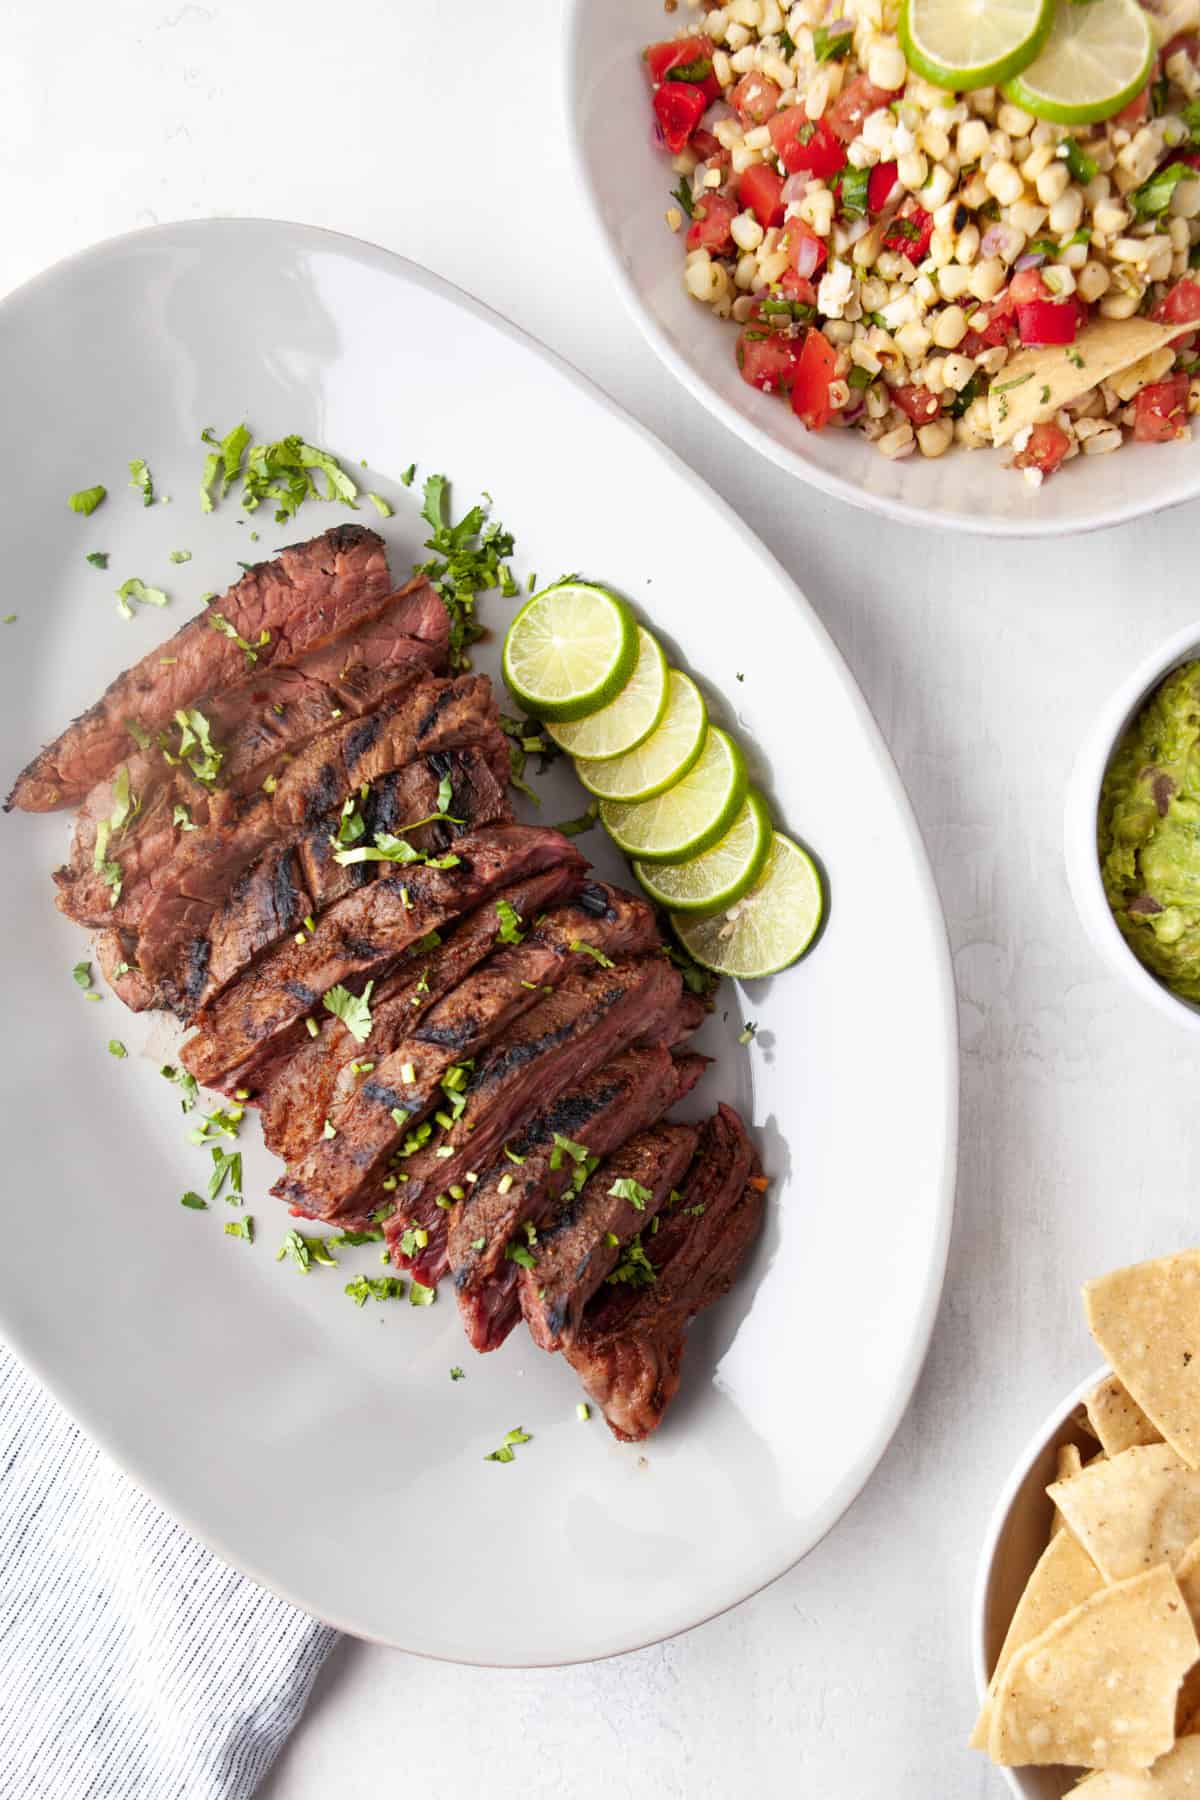 grilled flank steak sliced against the grain and served with limes and cilantro